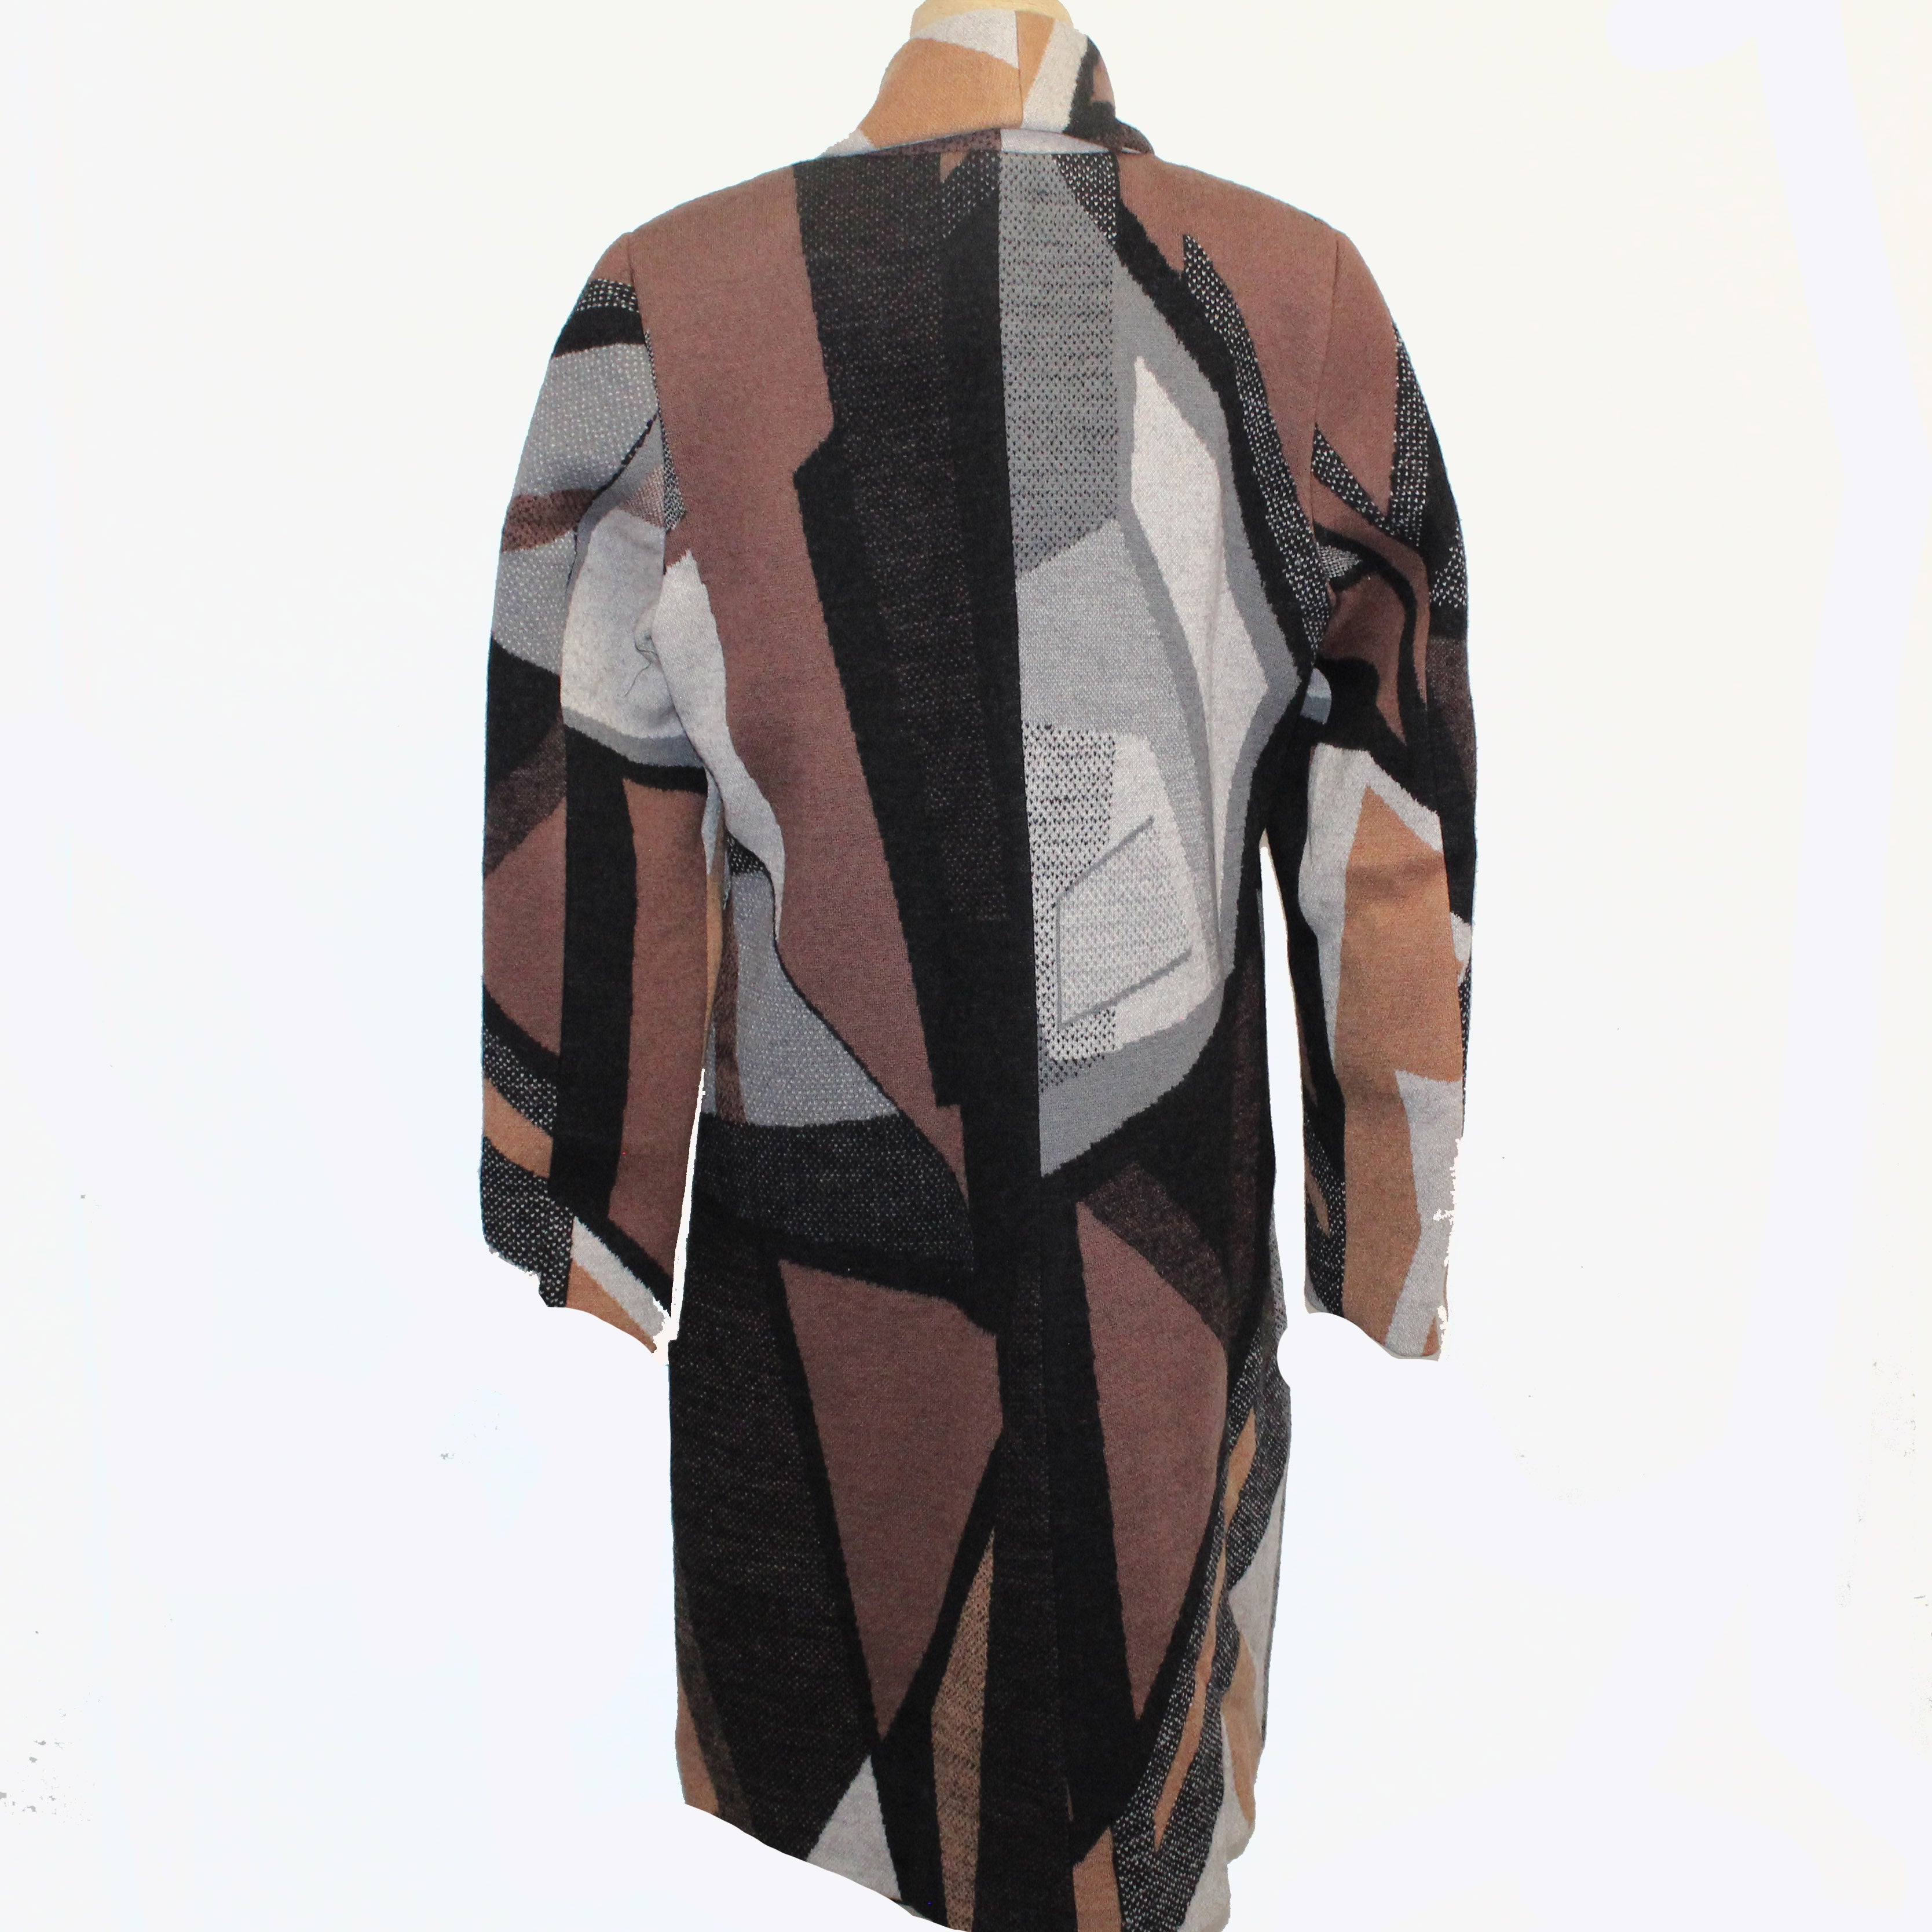 IVKO Coat, Abstract Pattern, Brown/Gold/Grey/Black/White S, M & L